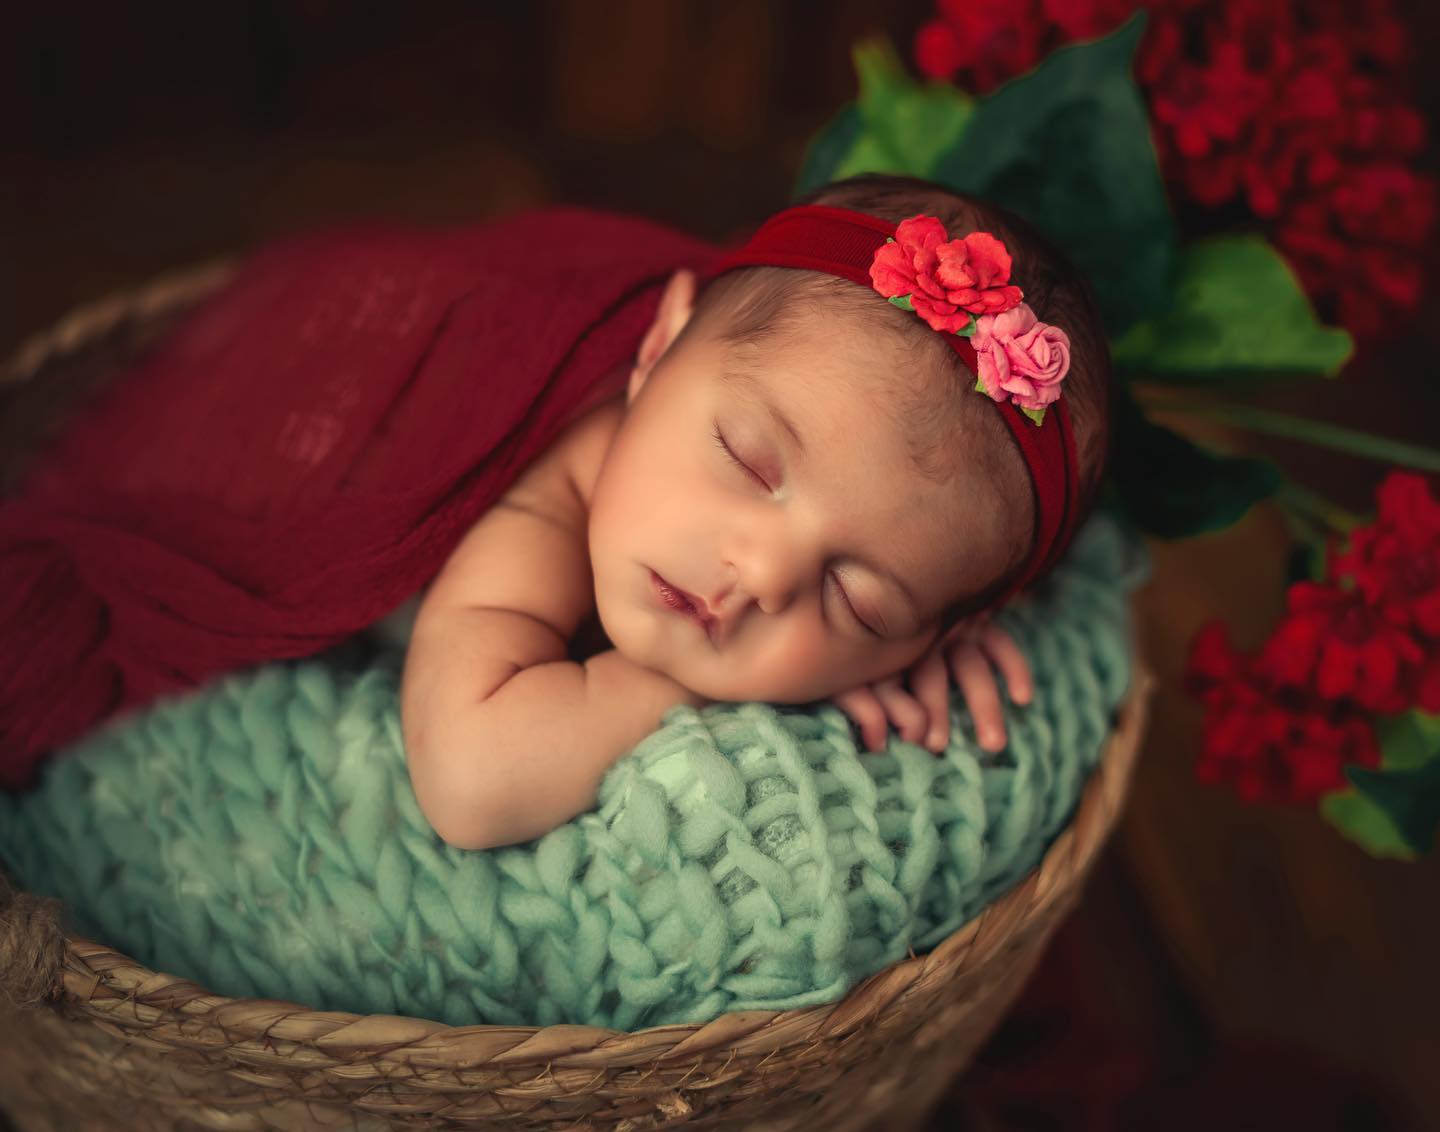 We specialize in elegant newborn photography and baby photography. If you are looking for baby photography or Baby Photoshoot Bangalore, contact us now!